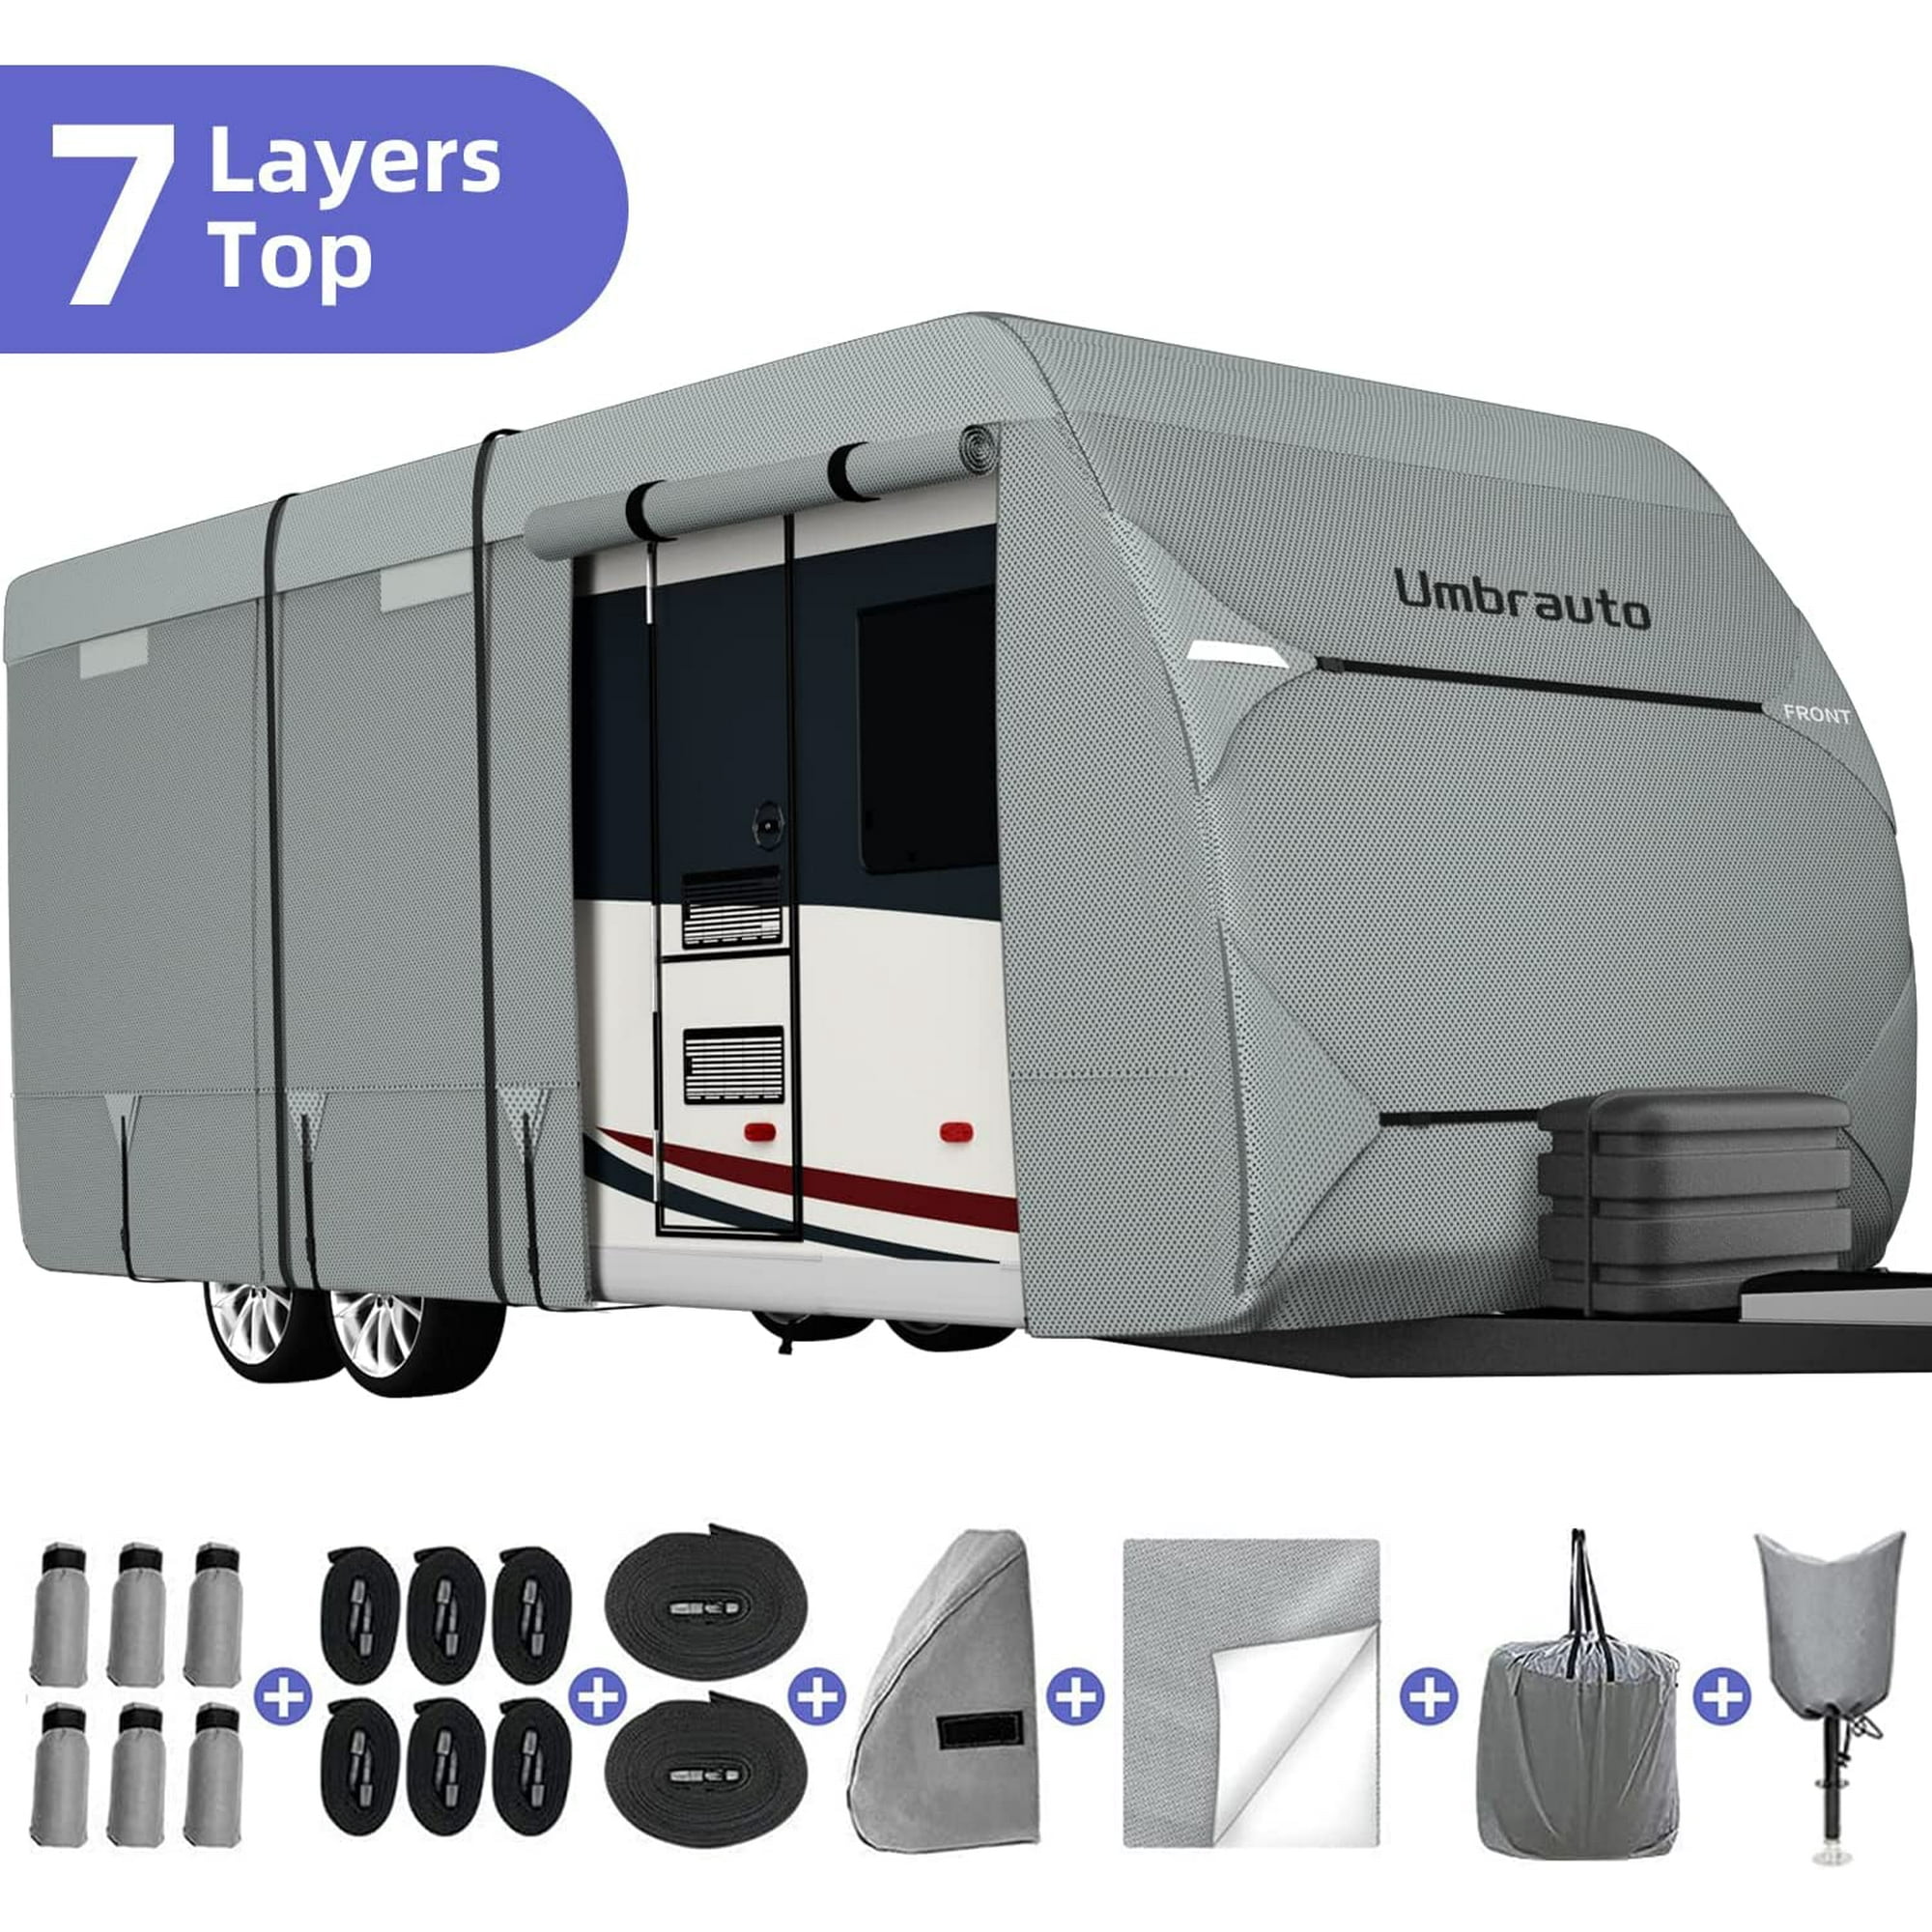 organisere Artifact Tilfredsstille RV Cover 2022 Upgraded 7 Layers Top Travel Trailer Cover Windproof Camper  Cover with RV Accessories Tongue Jack Cover, Gutter Covers, Storage Bag  fits 18'-20' RV - Walmart.com